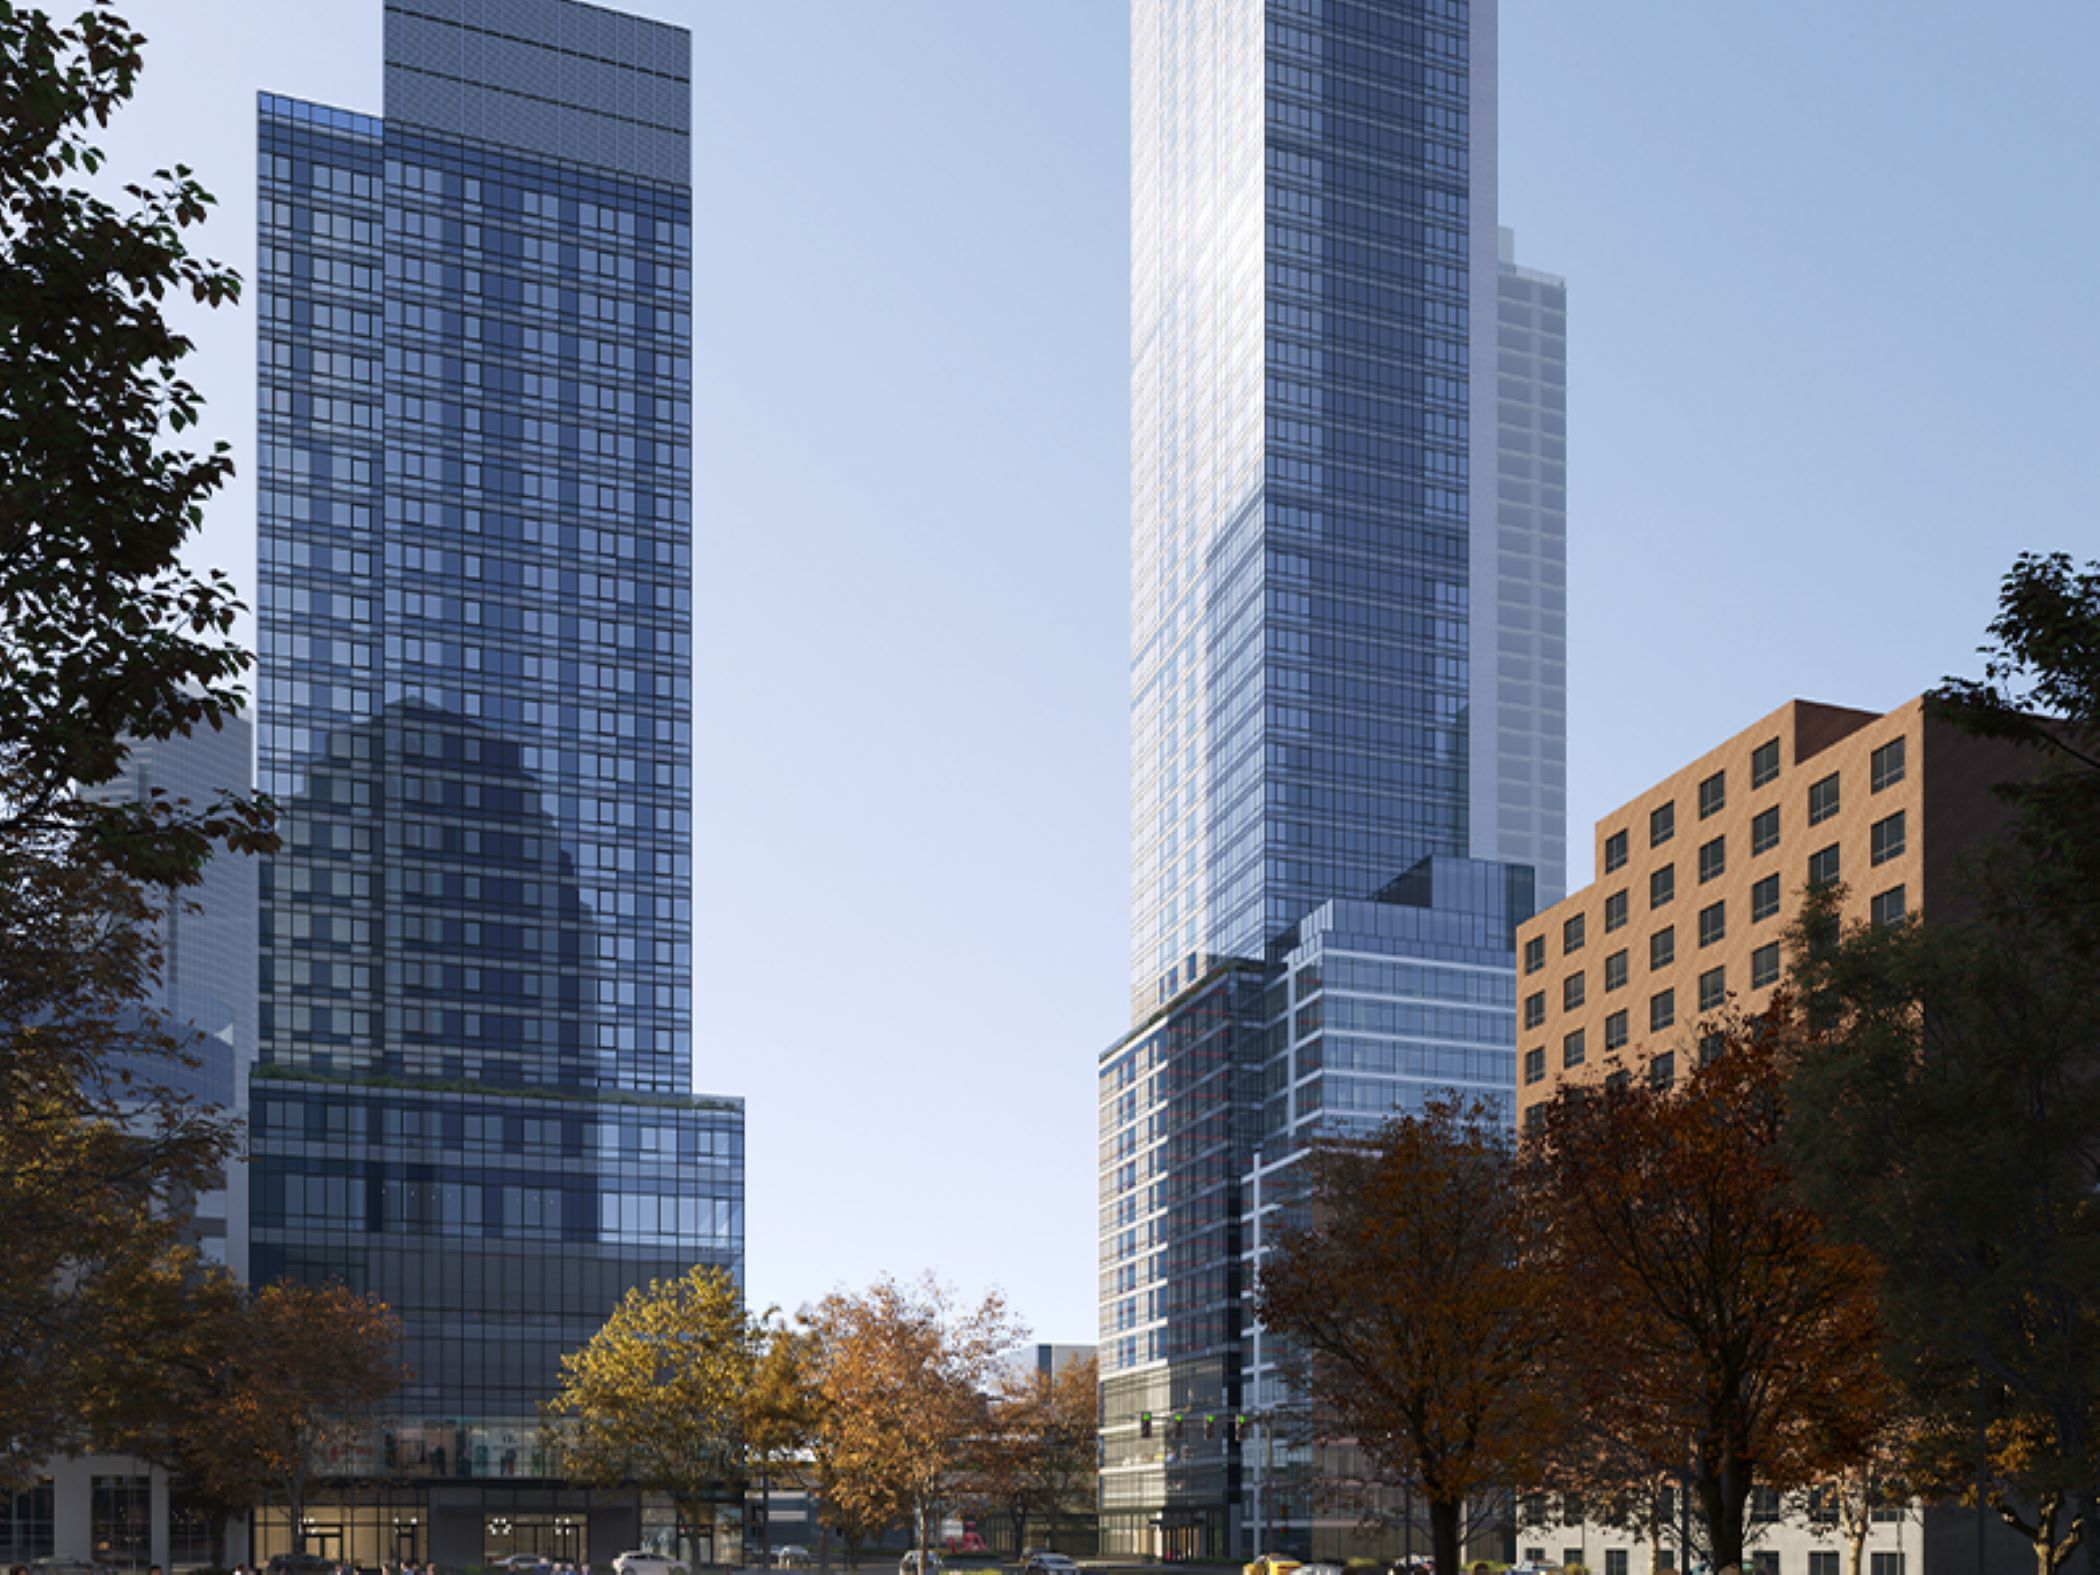 The Italic, a mixed-use luxury residential development project in New York’s Long Island City neighborhood, depicted in a rendering, has landed $350 million in debt and equity financing. (JLL)